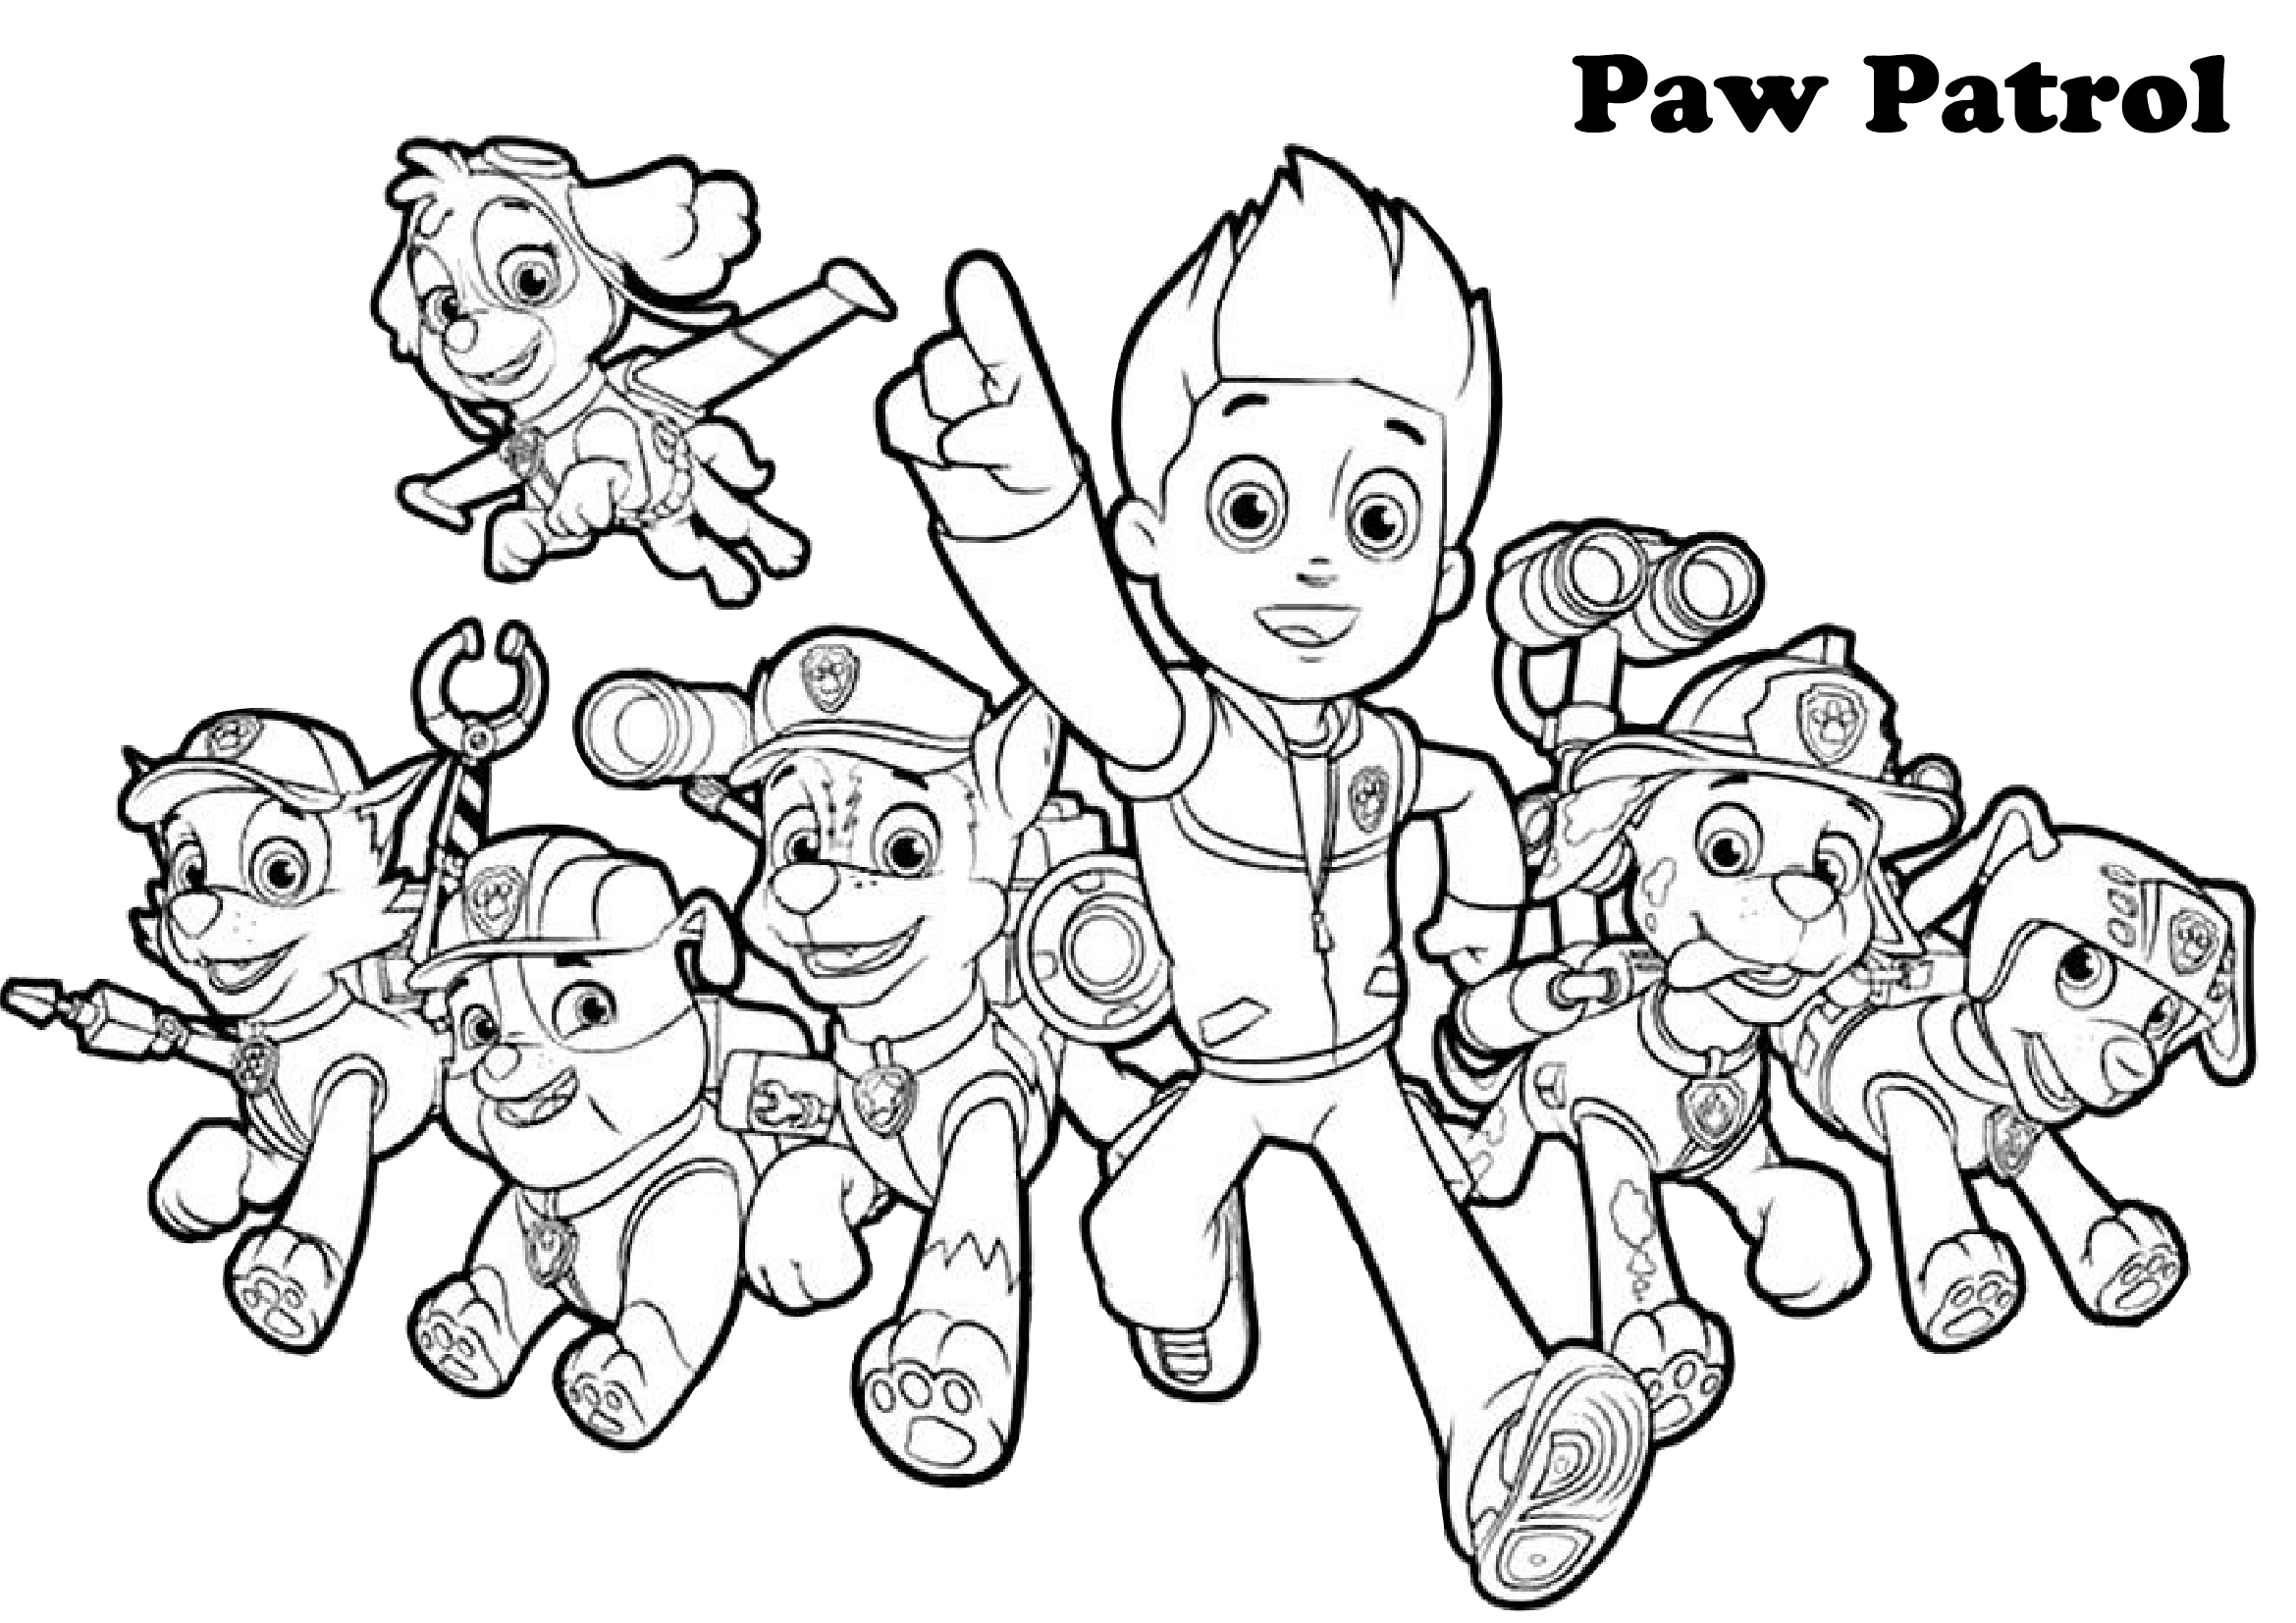 Paw patrol Coloring Page All Characters